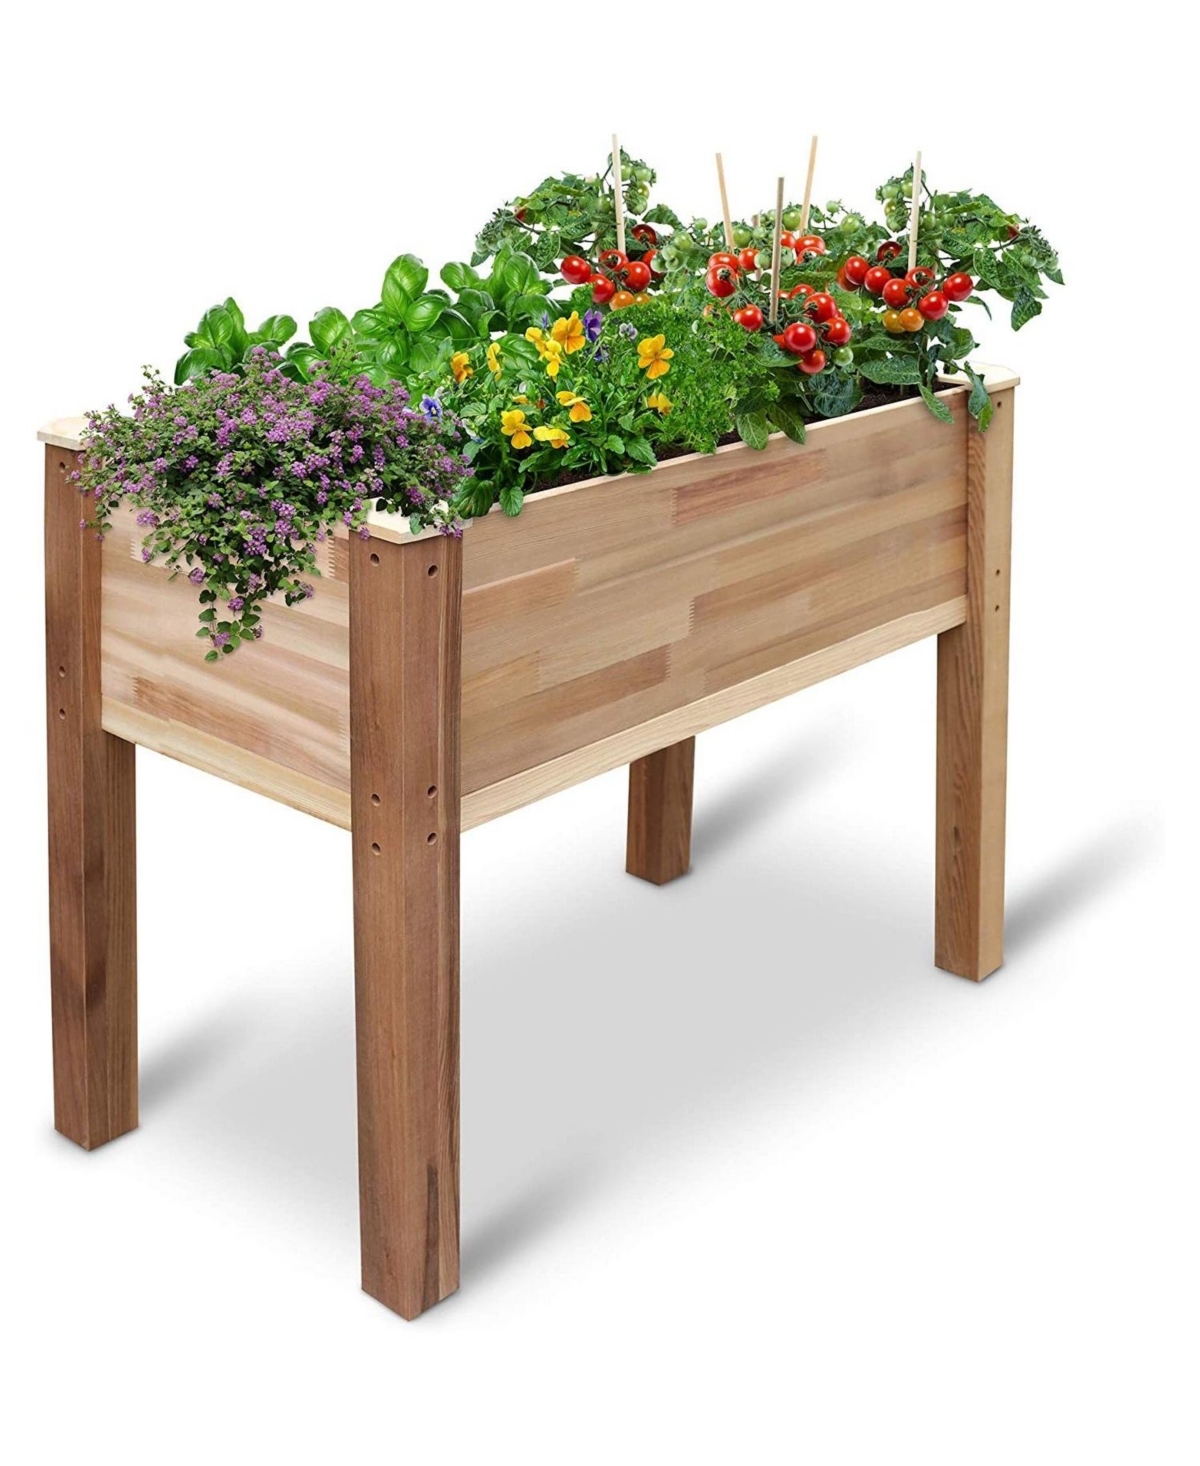 Raised Garden Bed, Elevated Herb Garden Planter for Patio & More - Brown